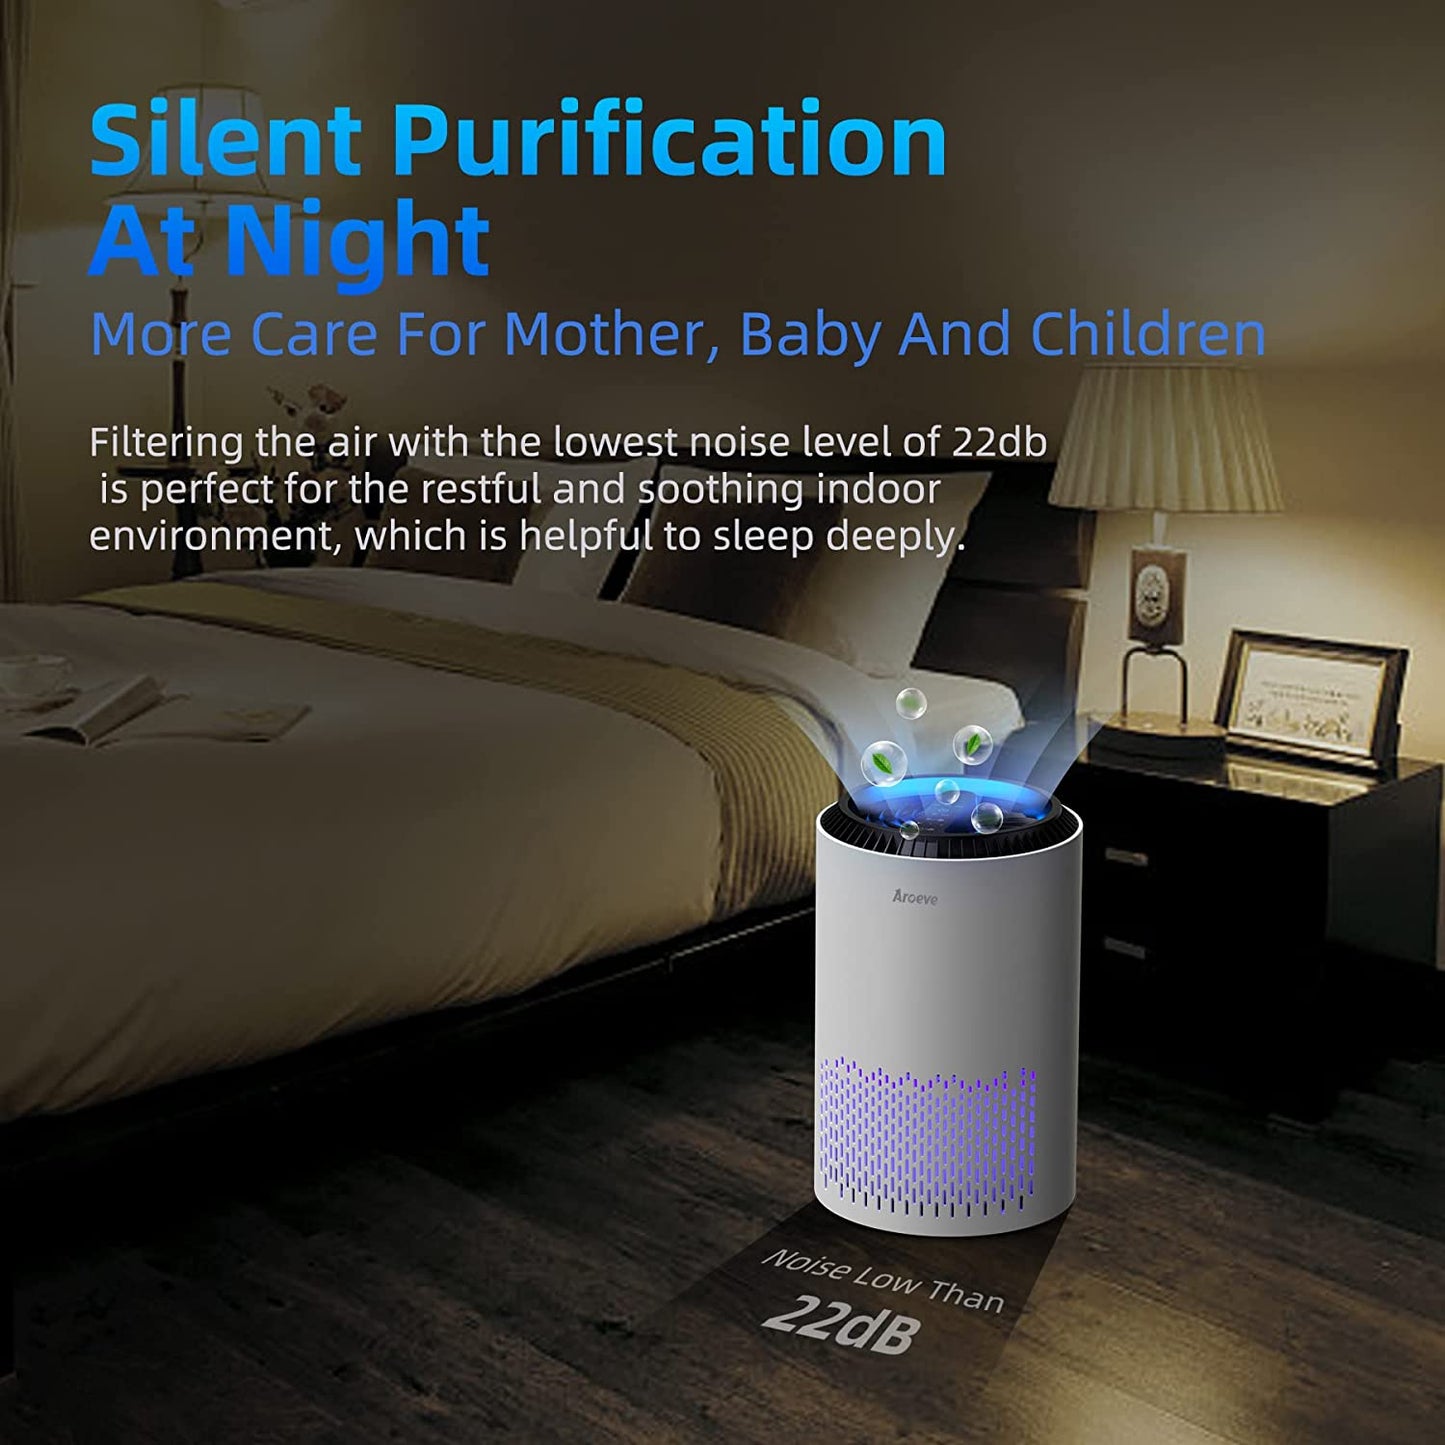 " HEPA Air Purifier for Home and Office - Portable Air Cleaner for Smoke, Pollen, Dander, Hair, and Odor - Sleep Mode and Speed Control - Ideal for Bedroom, Office, and Living Room - MK01 (White)"